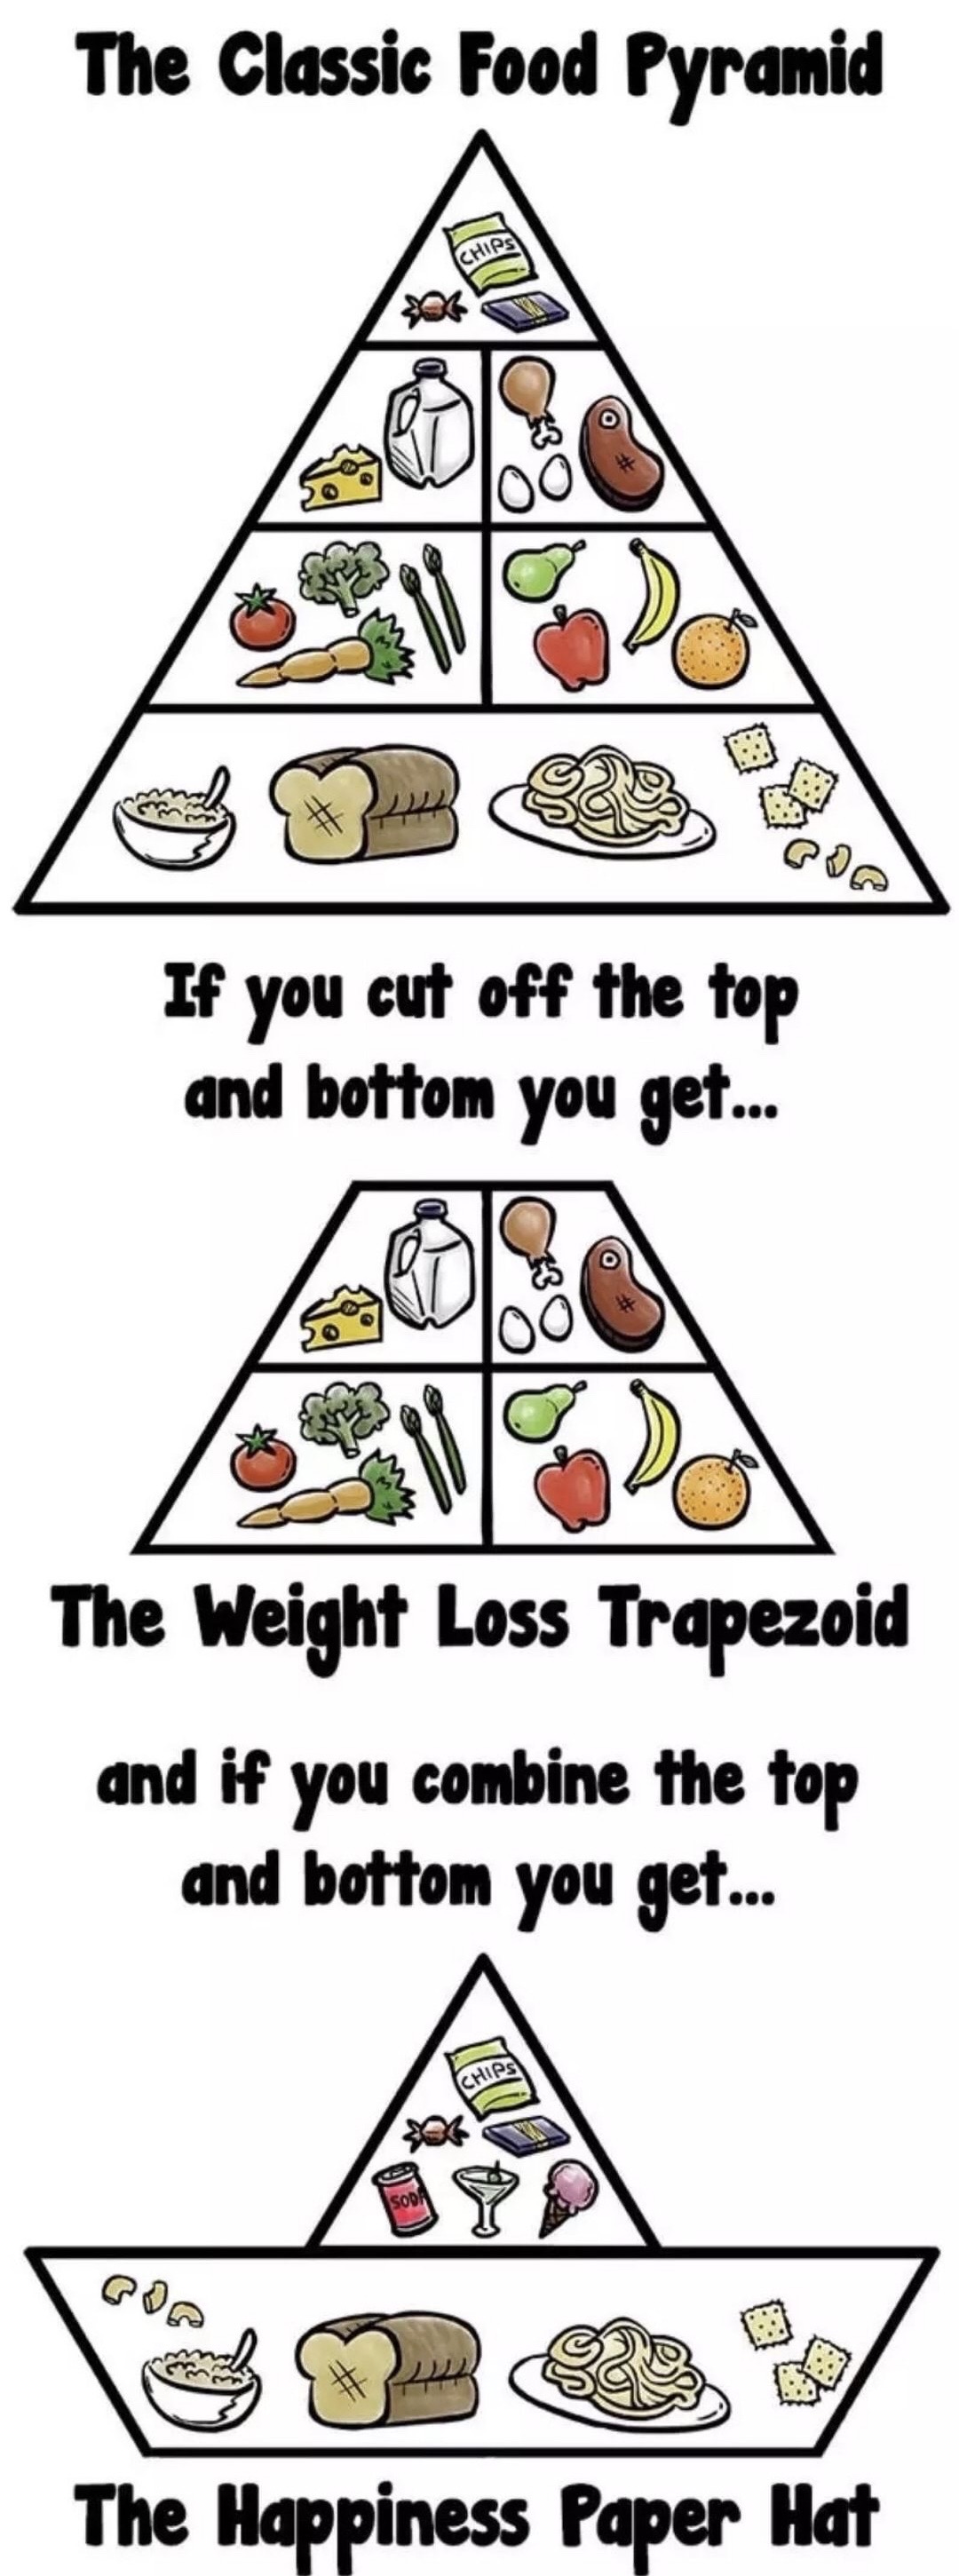 happiness paper hat - The Classic Food Pyramid If you cut off the top and bottom you get... The Weight Loss Trapezoid and if you combine the top and bottom you get... The Happiness Paper Hat